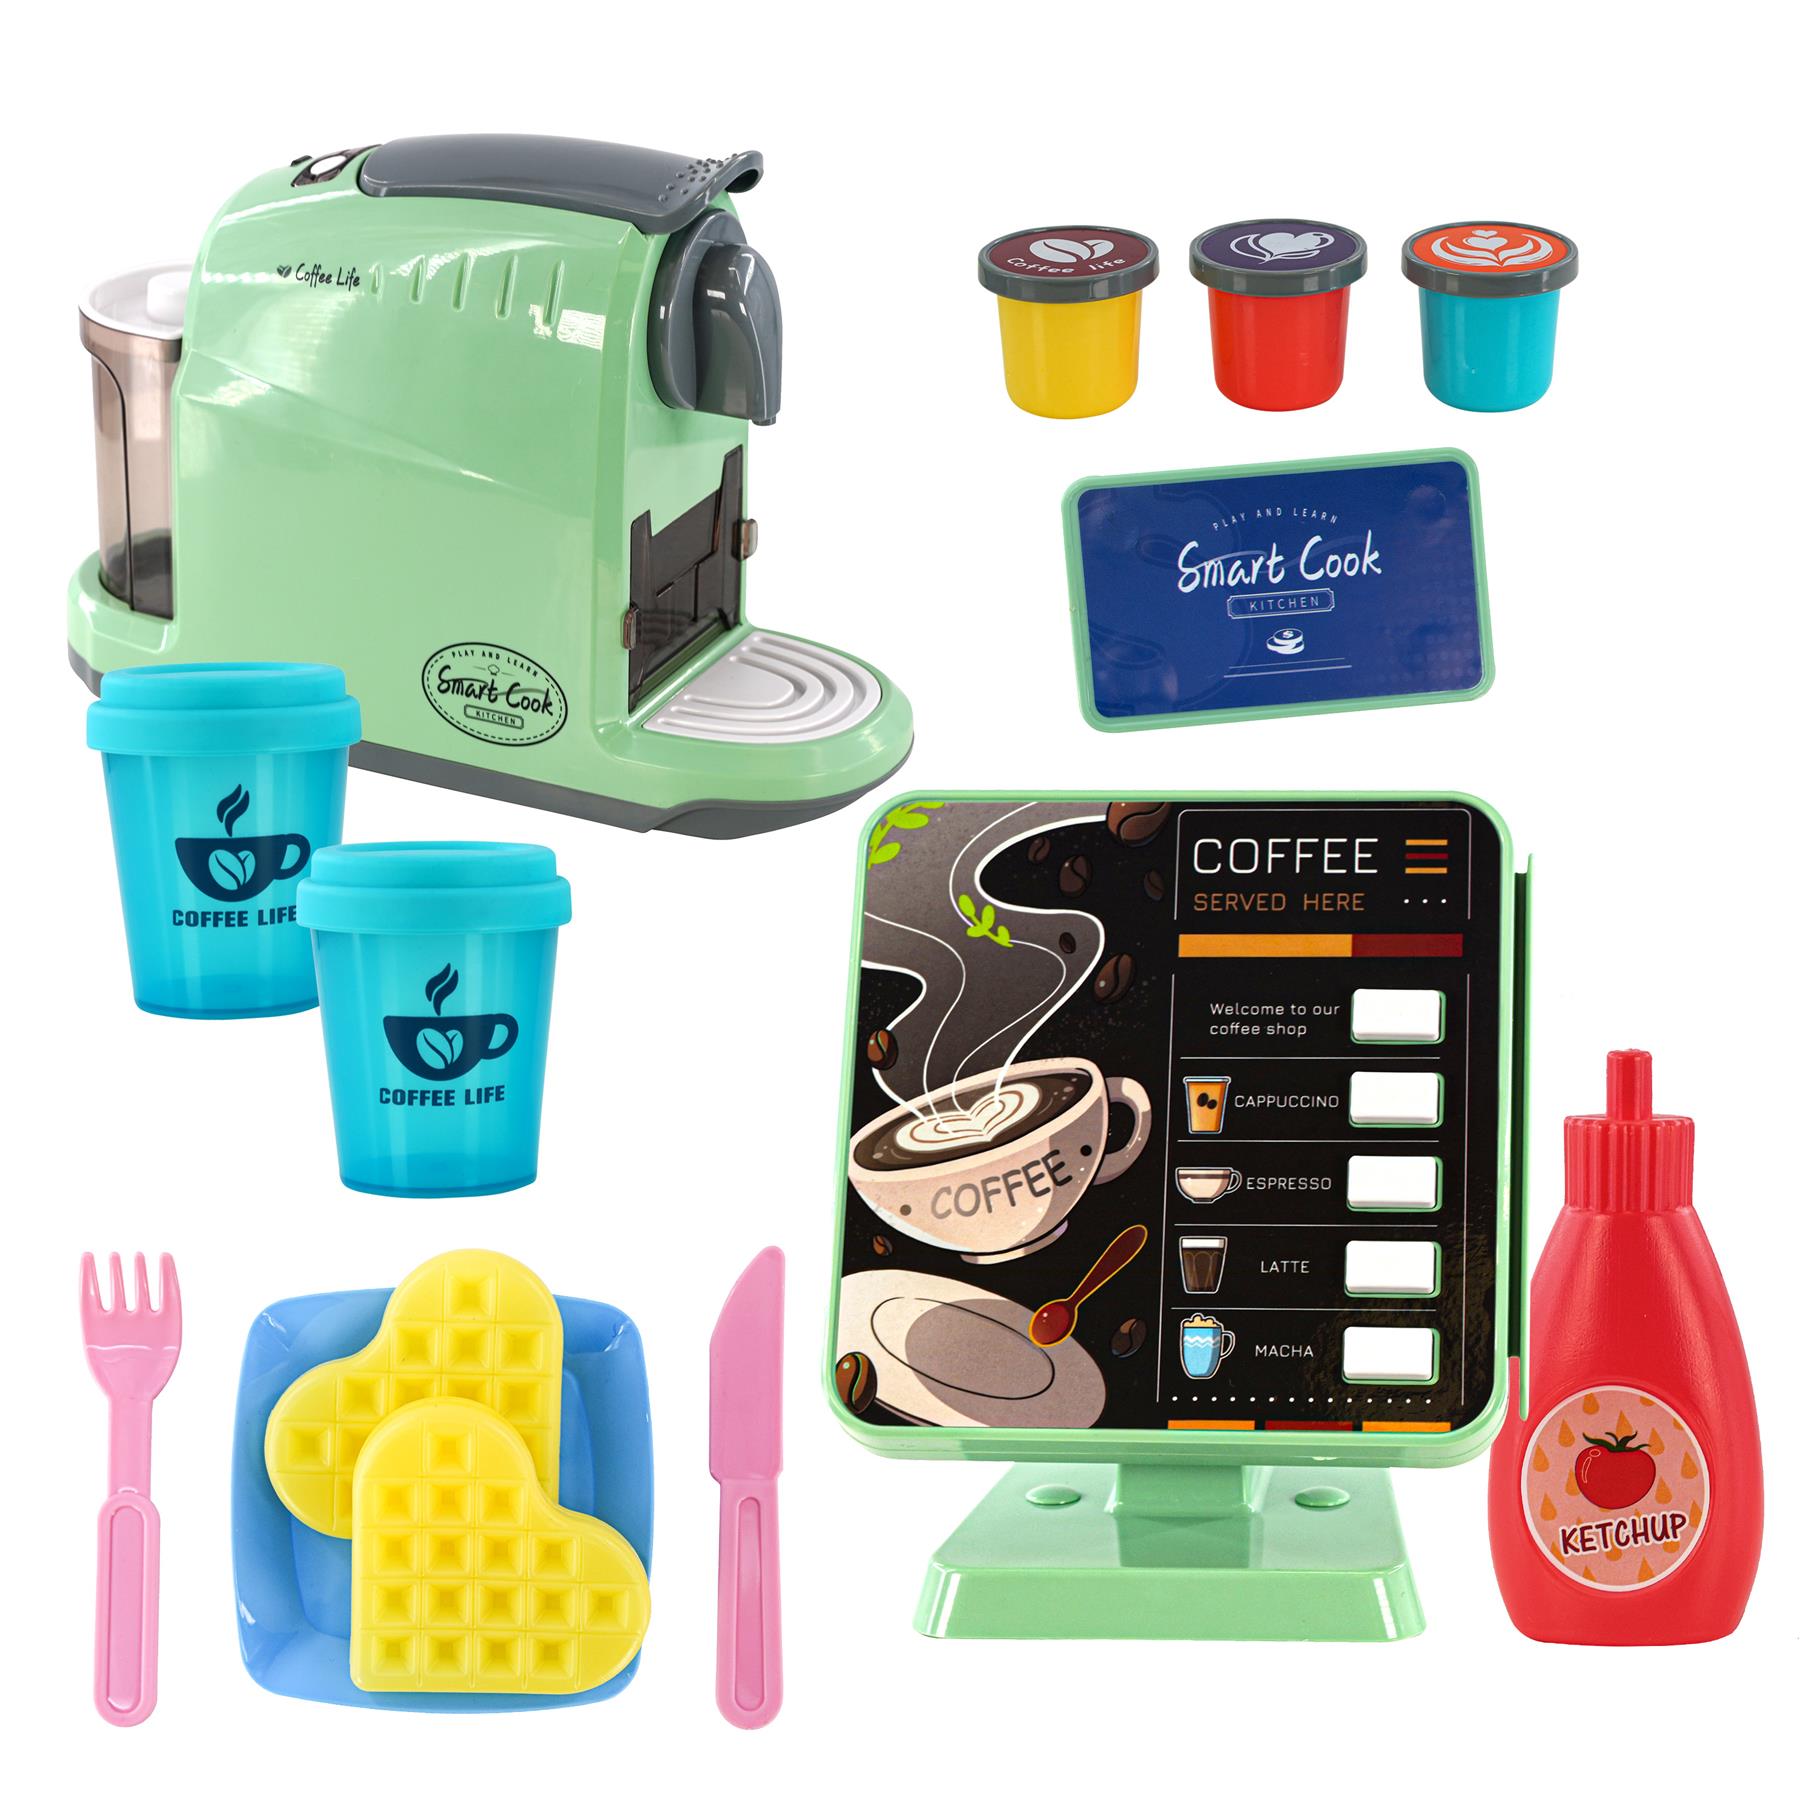 The Magic Toy Shop Toy Play Set Kids Coffee Maker Machine Toy Kitchen Role Play Set with Cash Register Play Food